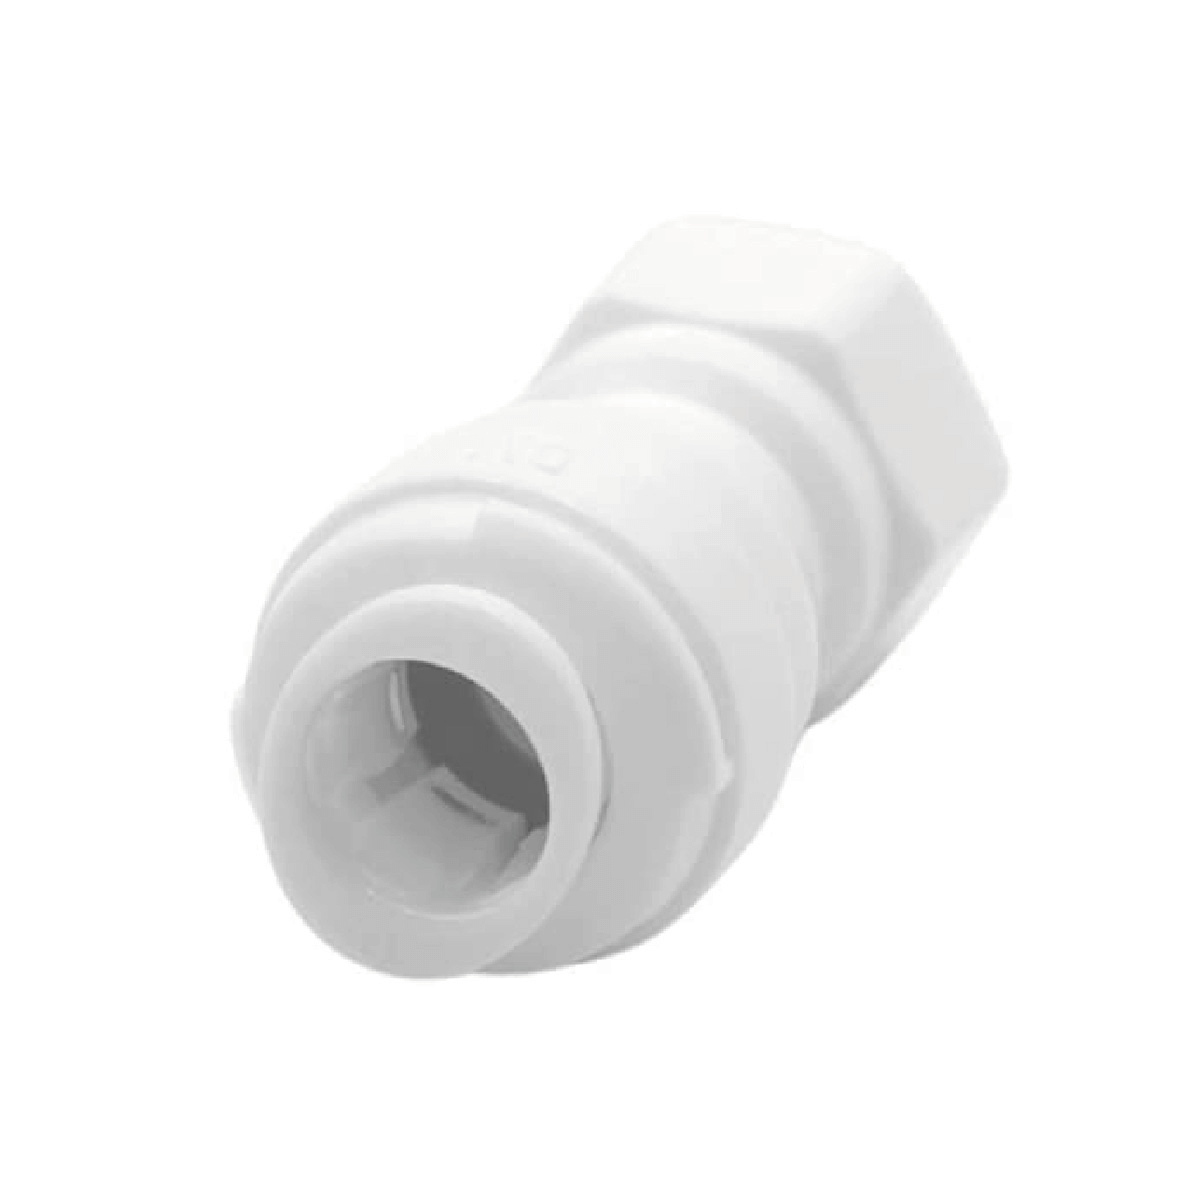 DMfit AFAU Acetal Fitting Female Adapter 1/4", 3/8"Tube OD, 7/16-24" UNS THREAD Cone Type (10 Pack)